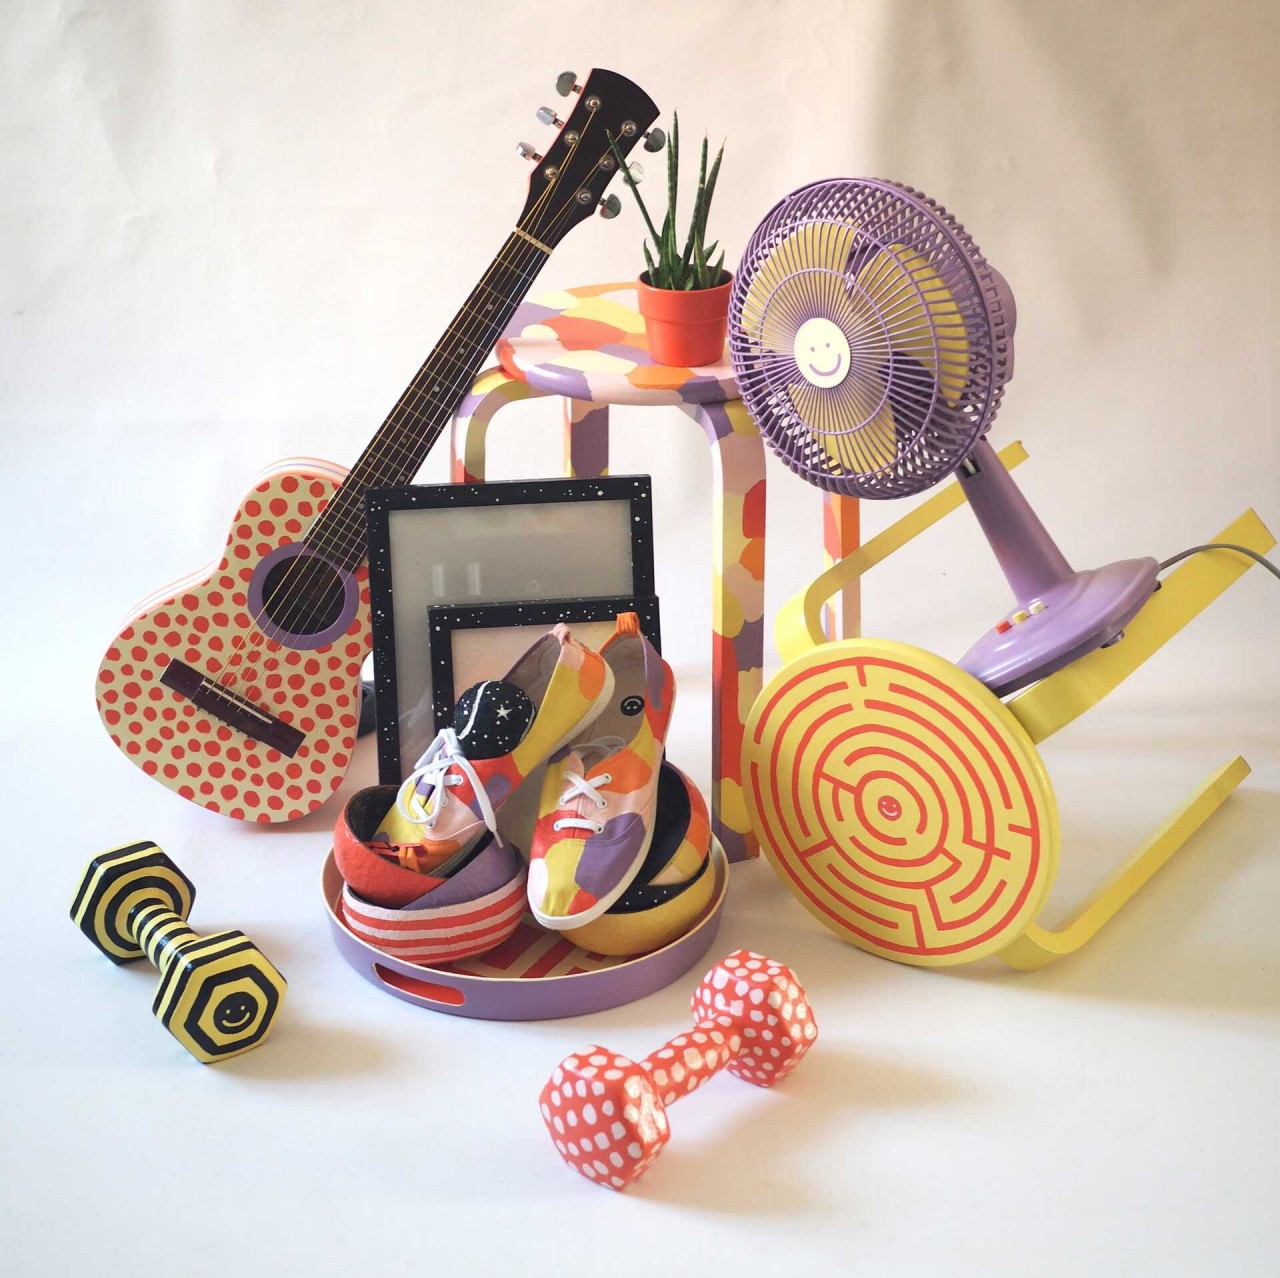 Swedish Artist Auctions Re-designed Items for Covid Fundraising